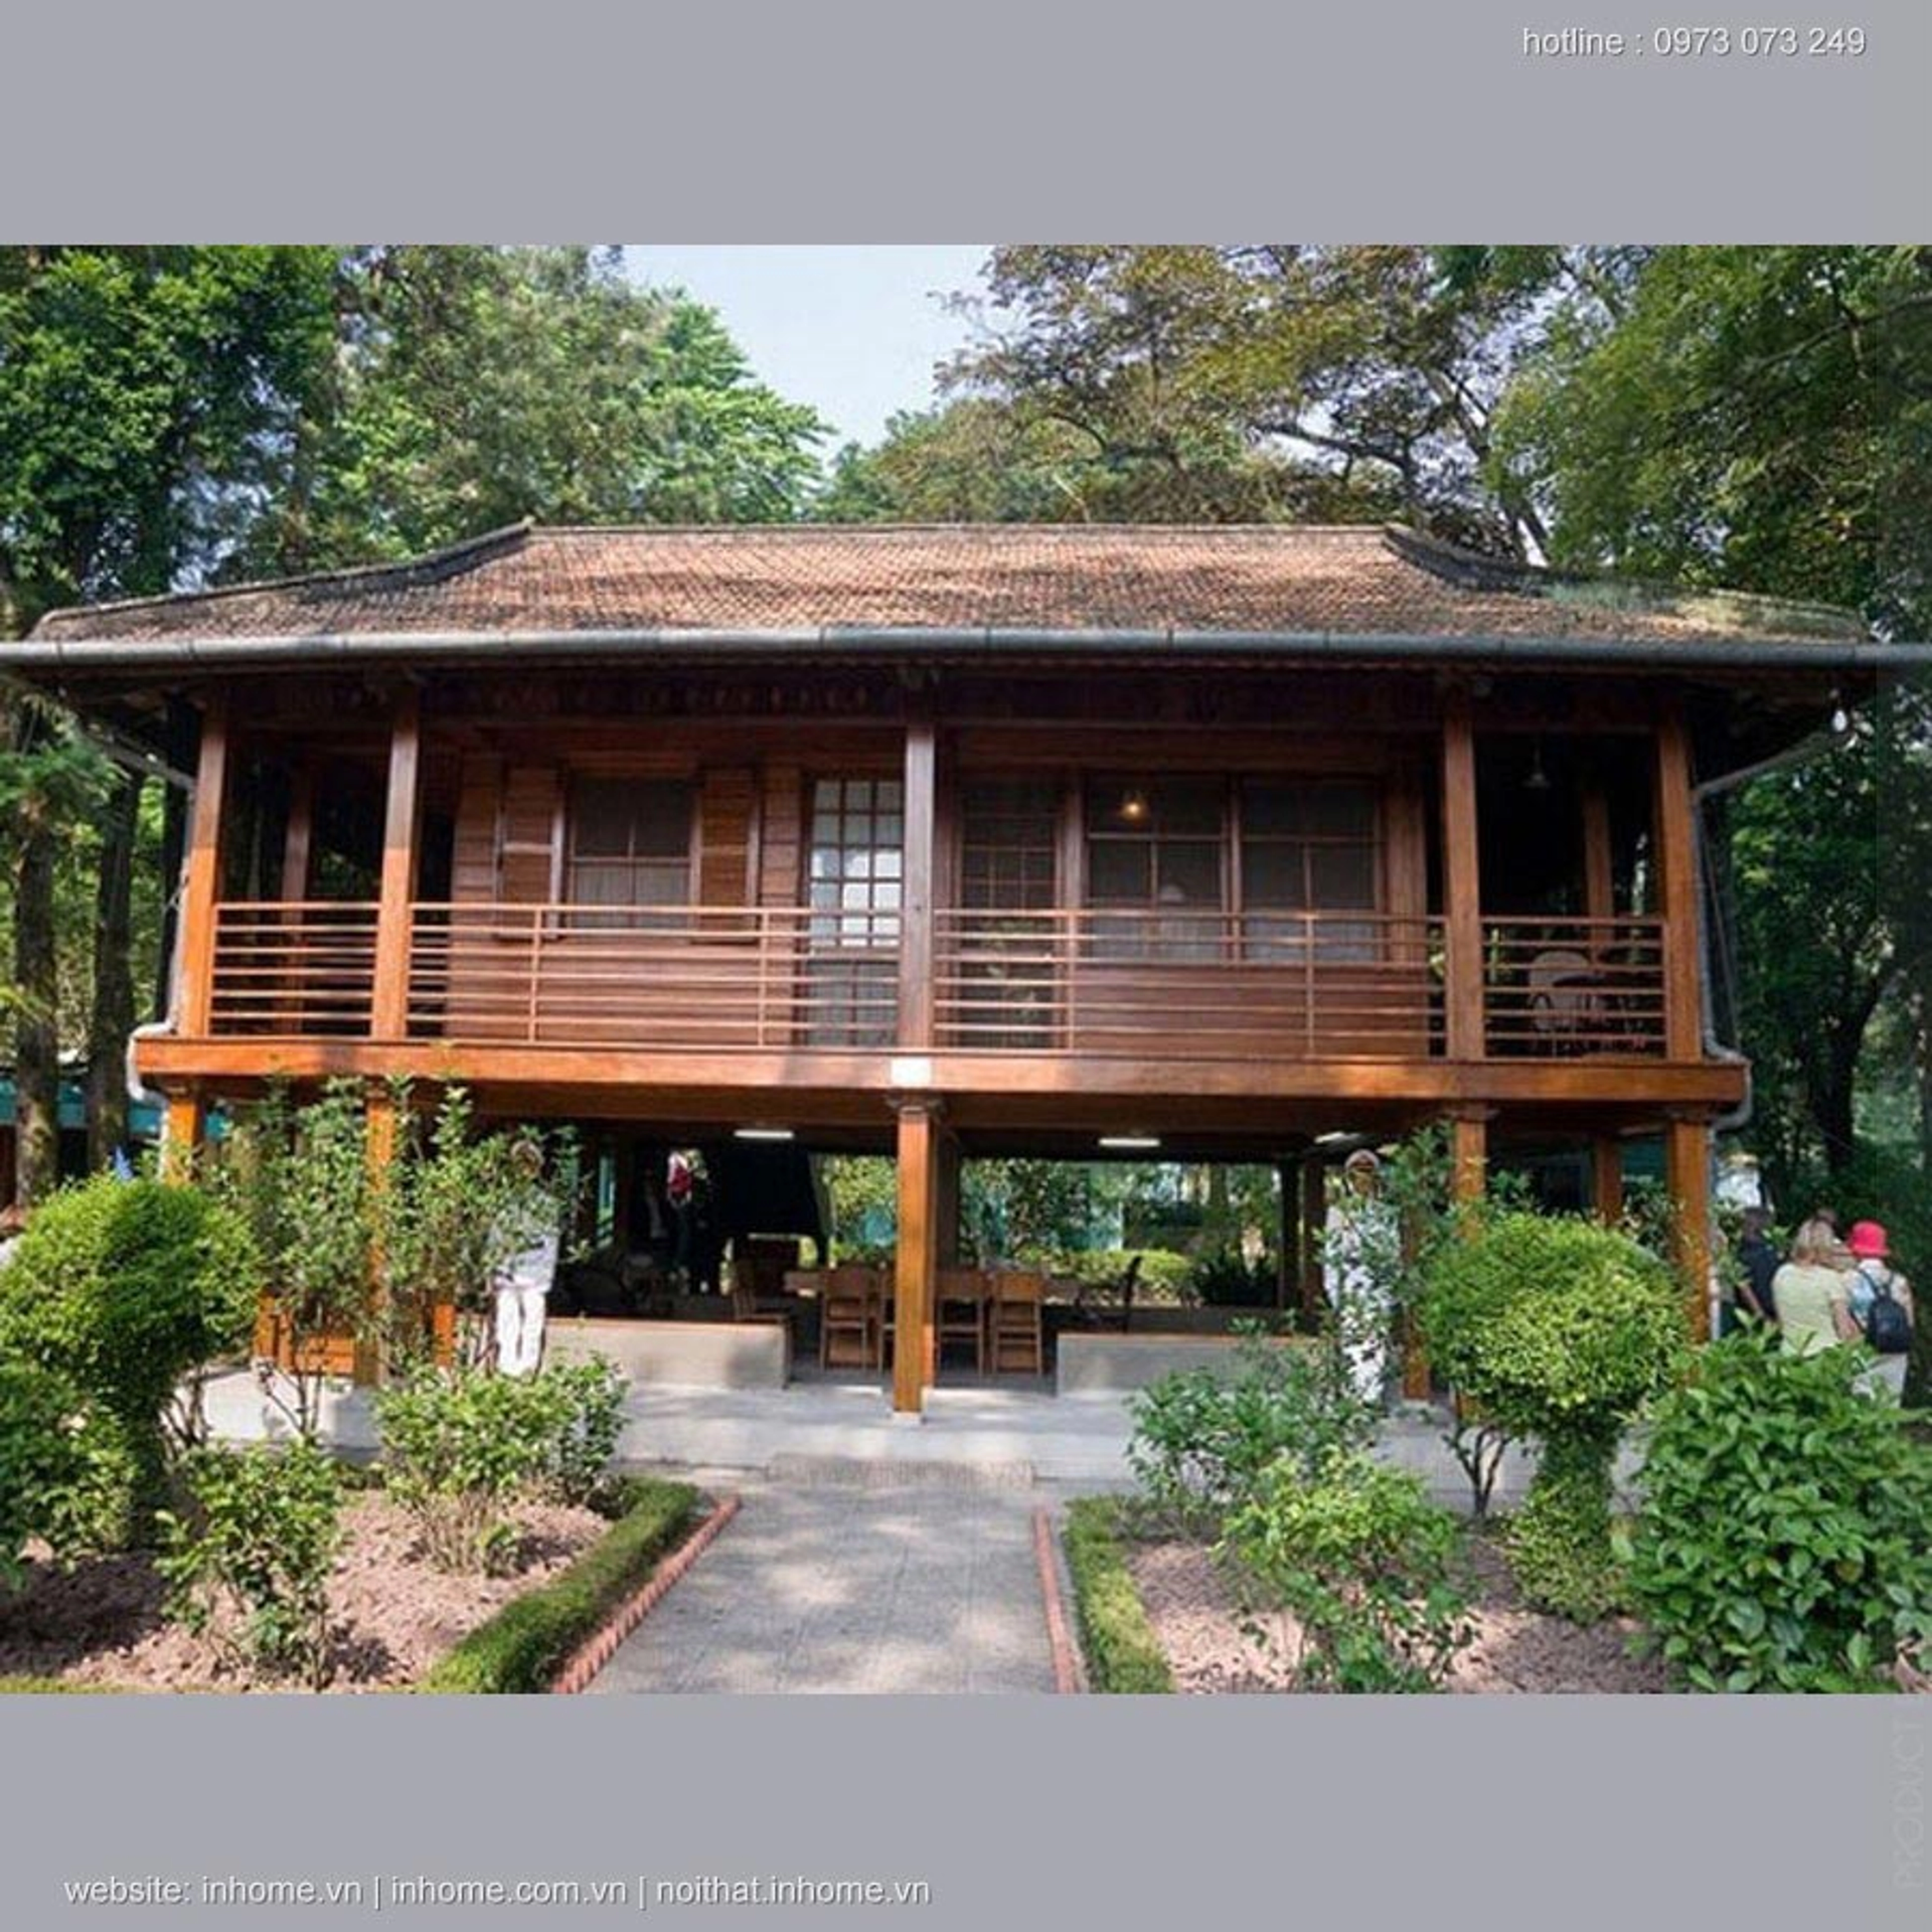 Ho Chi Minh Stilt House - A Special Historical and Cultural Destination in Hanoi